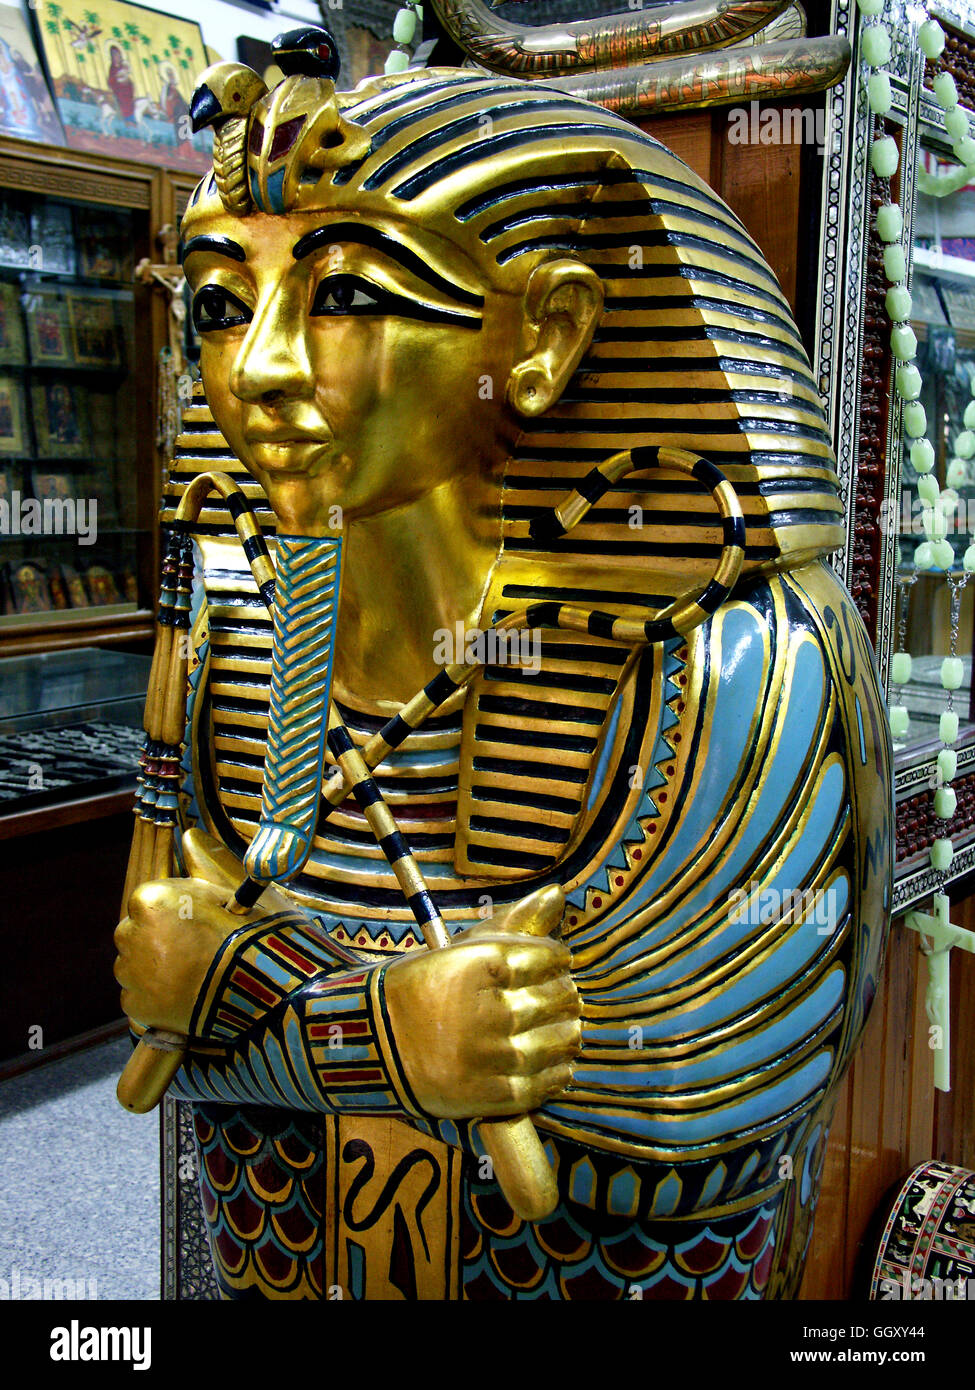 Store in the Coptic neighborhood of Cairo selling furniture modeled after ancient Egyptian artifacts. Mummy case of Tutankhamon. Stock Photo